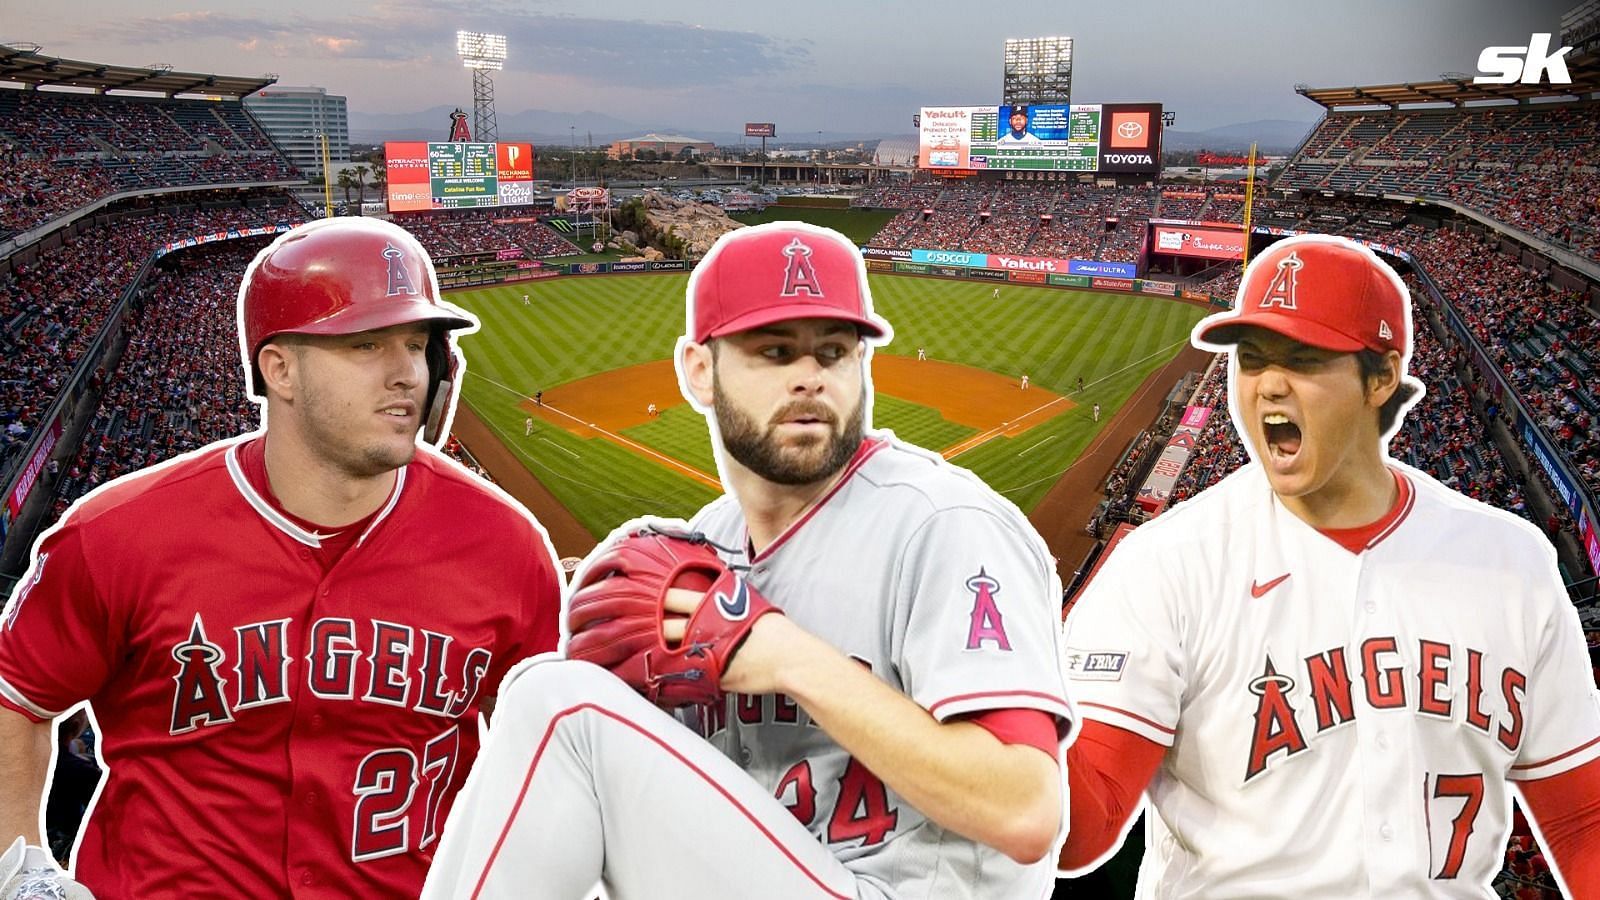 Los Angeles Angels Players - Mike Trout, Lucas Giolito, and Shohei Ohtani